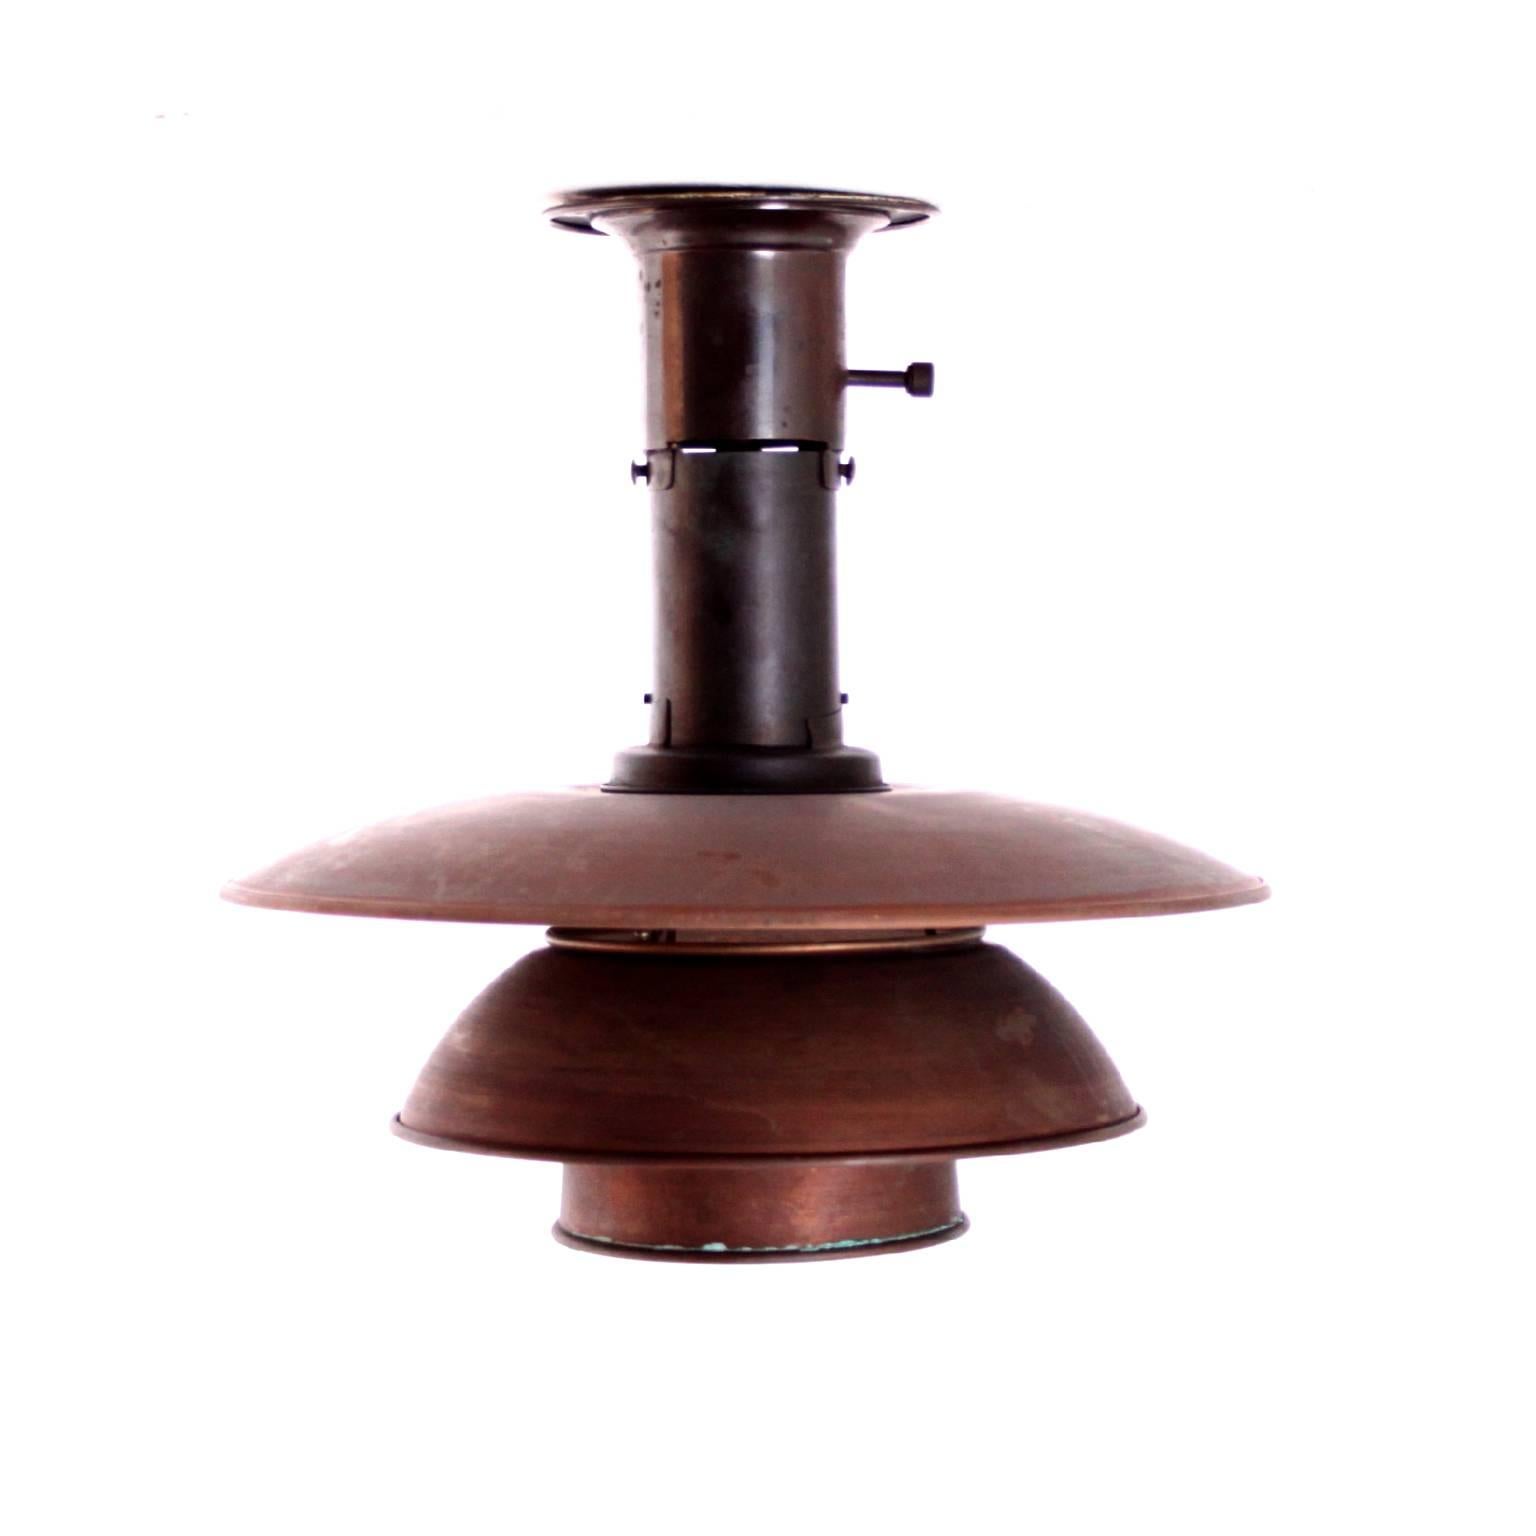 Early Poul Henningsen Ceiling Light  ( PH 3/3 ) in Patinated Copper 1930s (Dänisch)